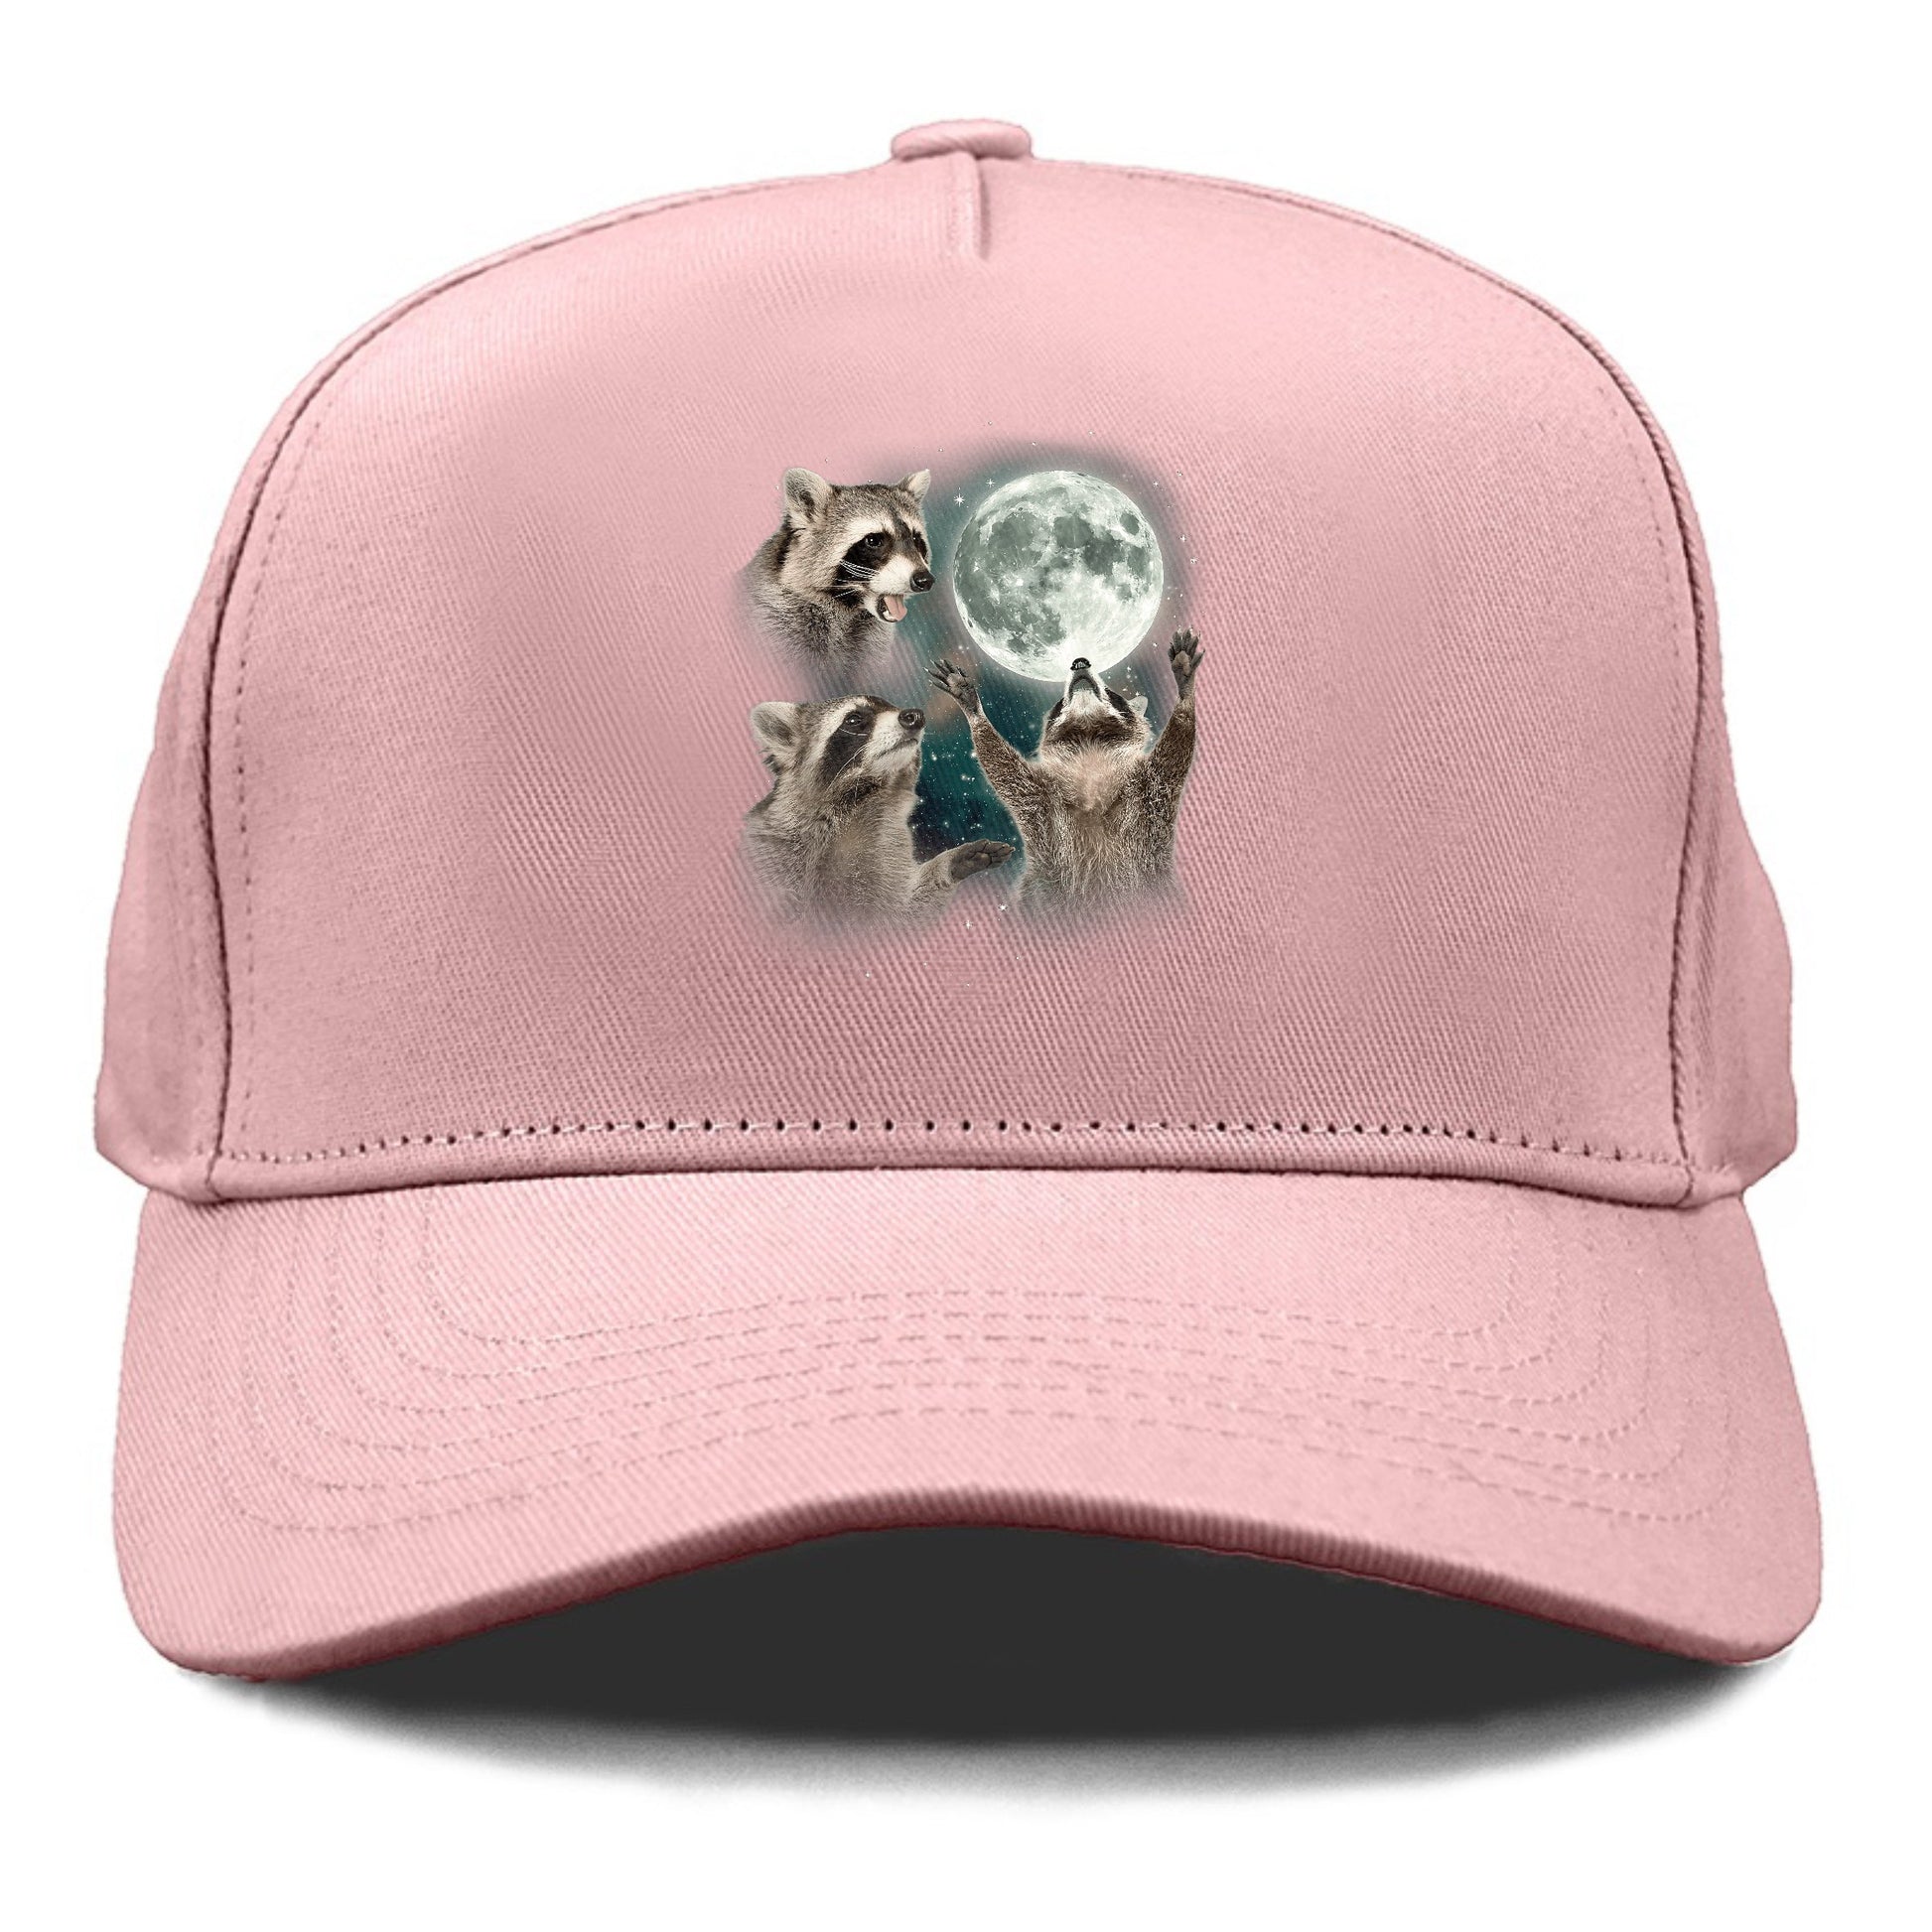 Racoons howling at the Moon Hat